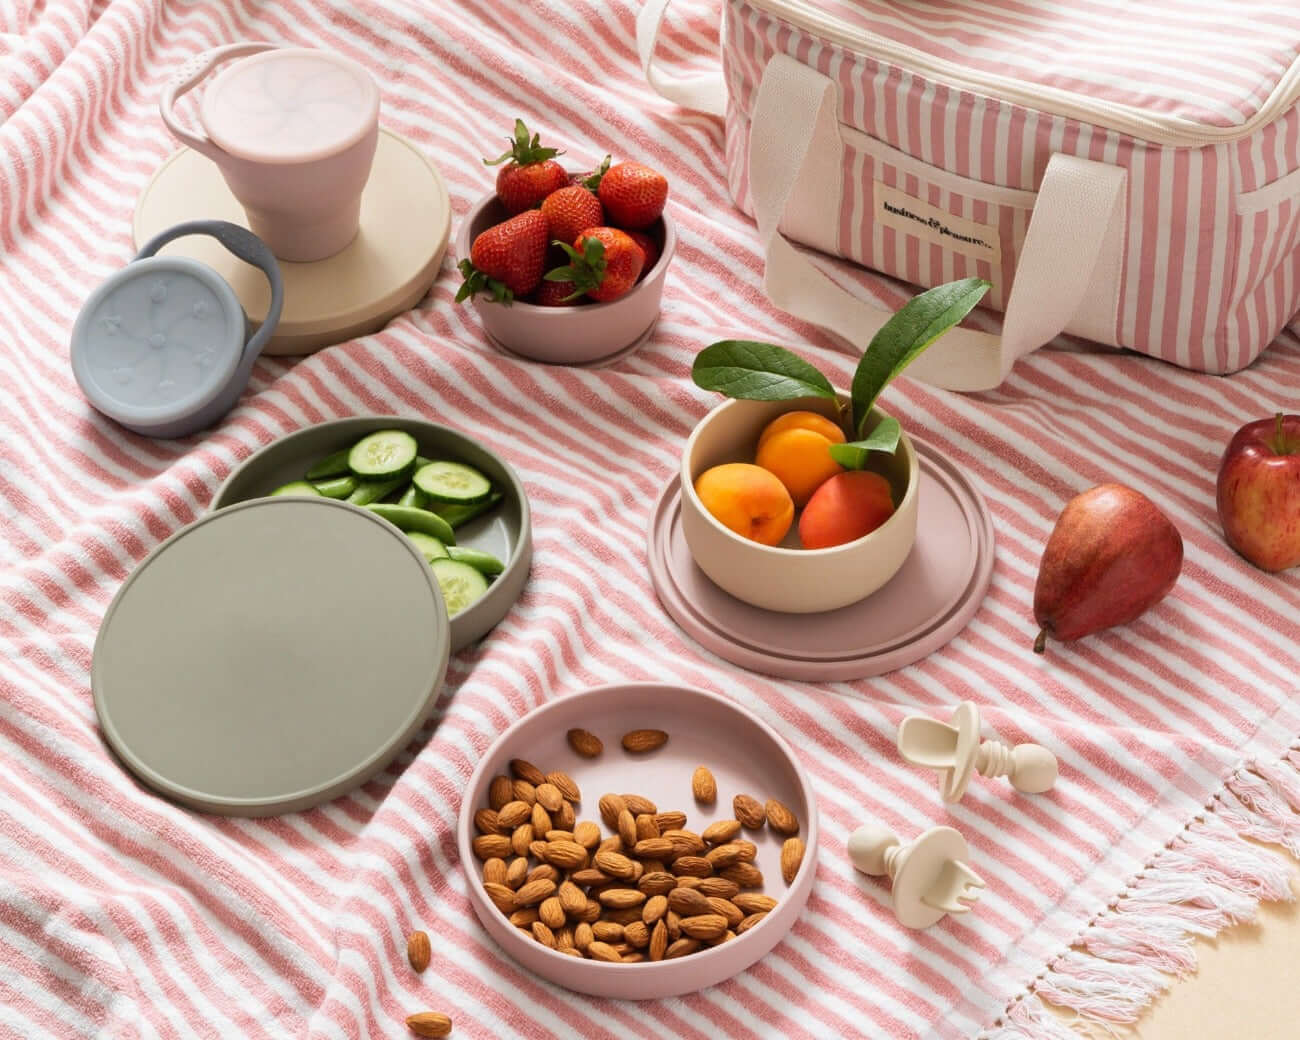 Maison Rue Picnic Set-Up With The Cleo Plate, Stevie Bowl, Cam Snack Cup & Harley Utensils